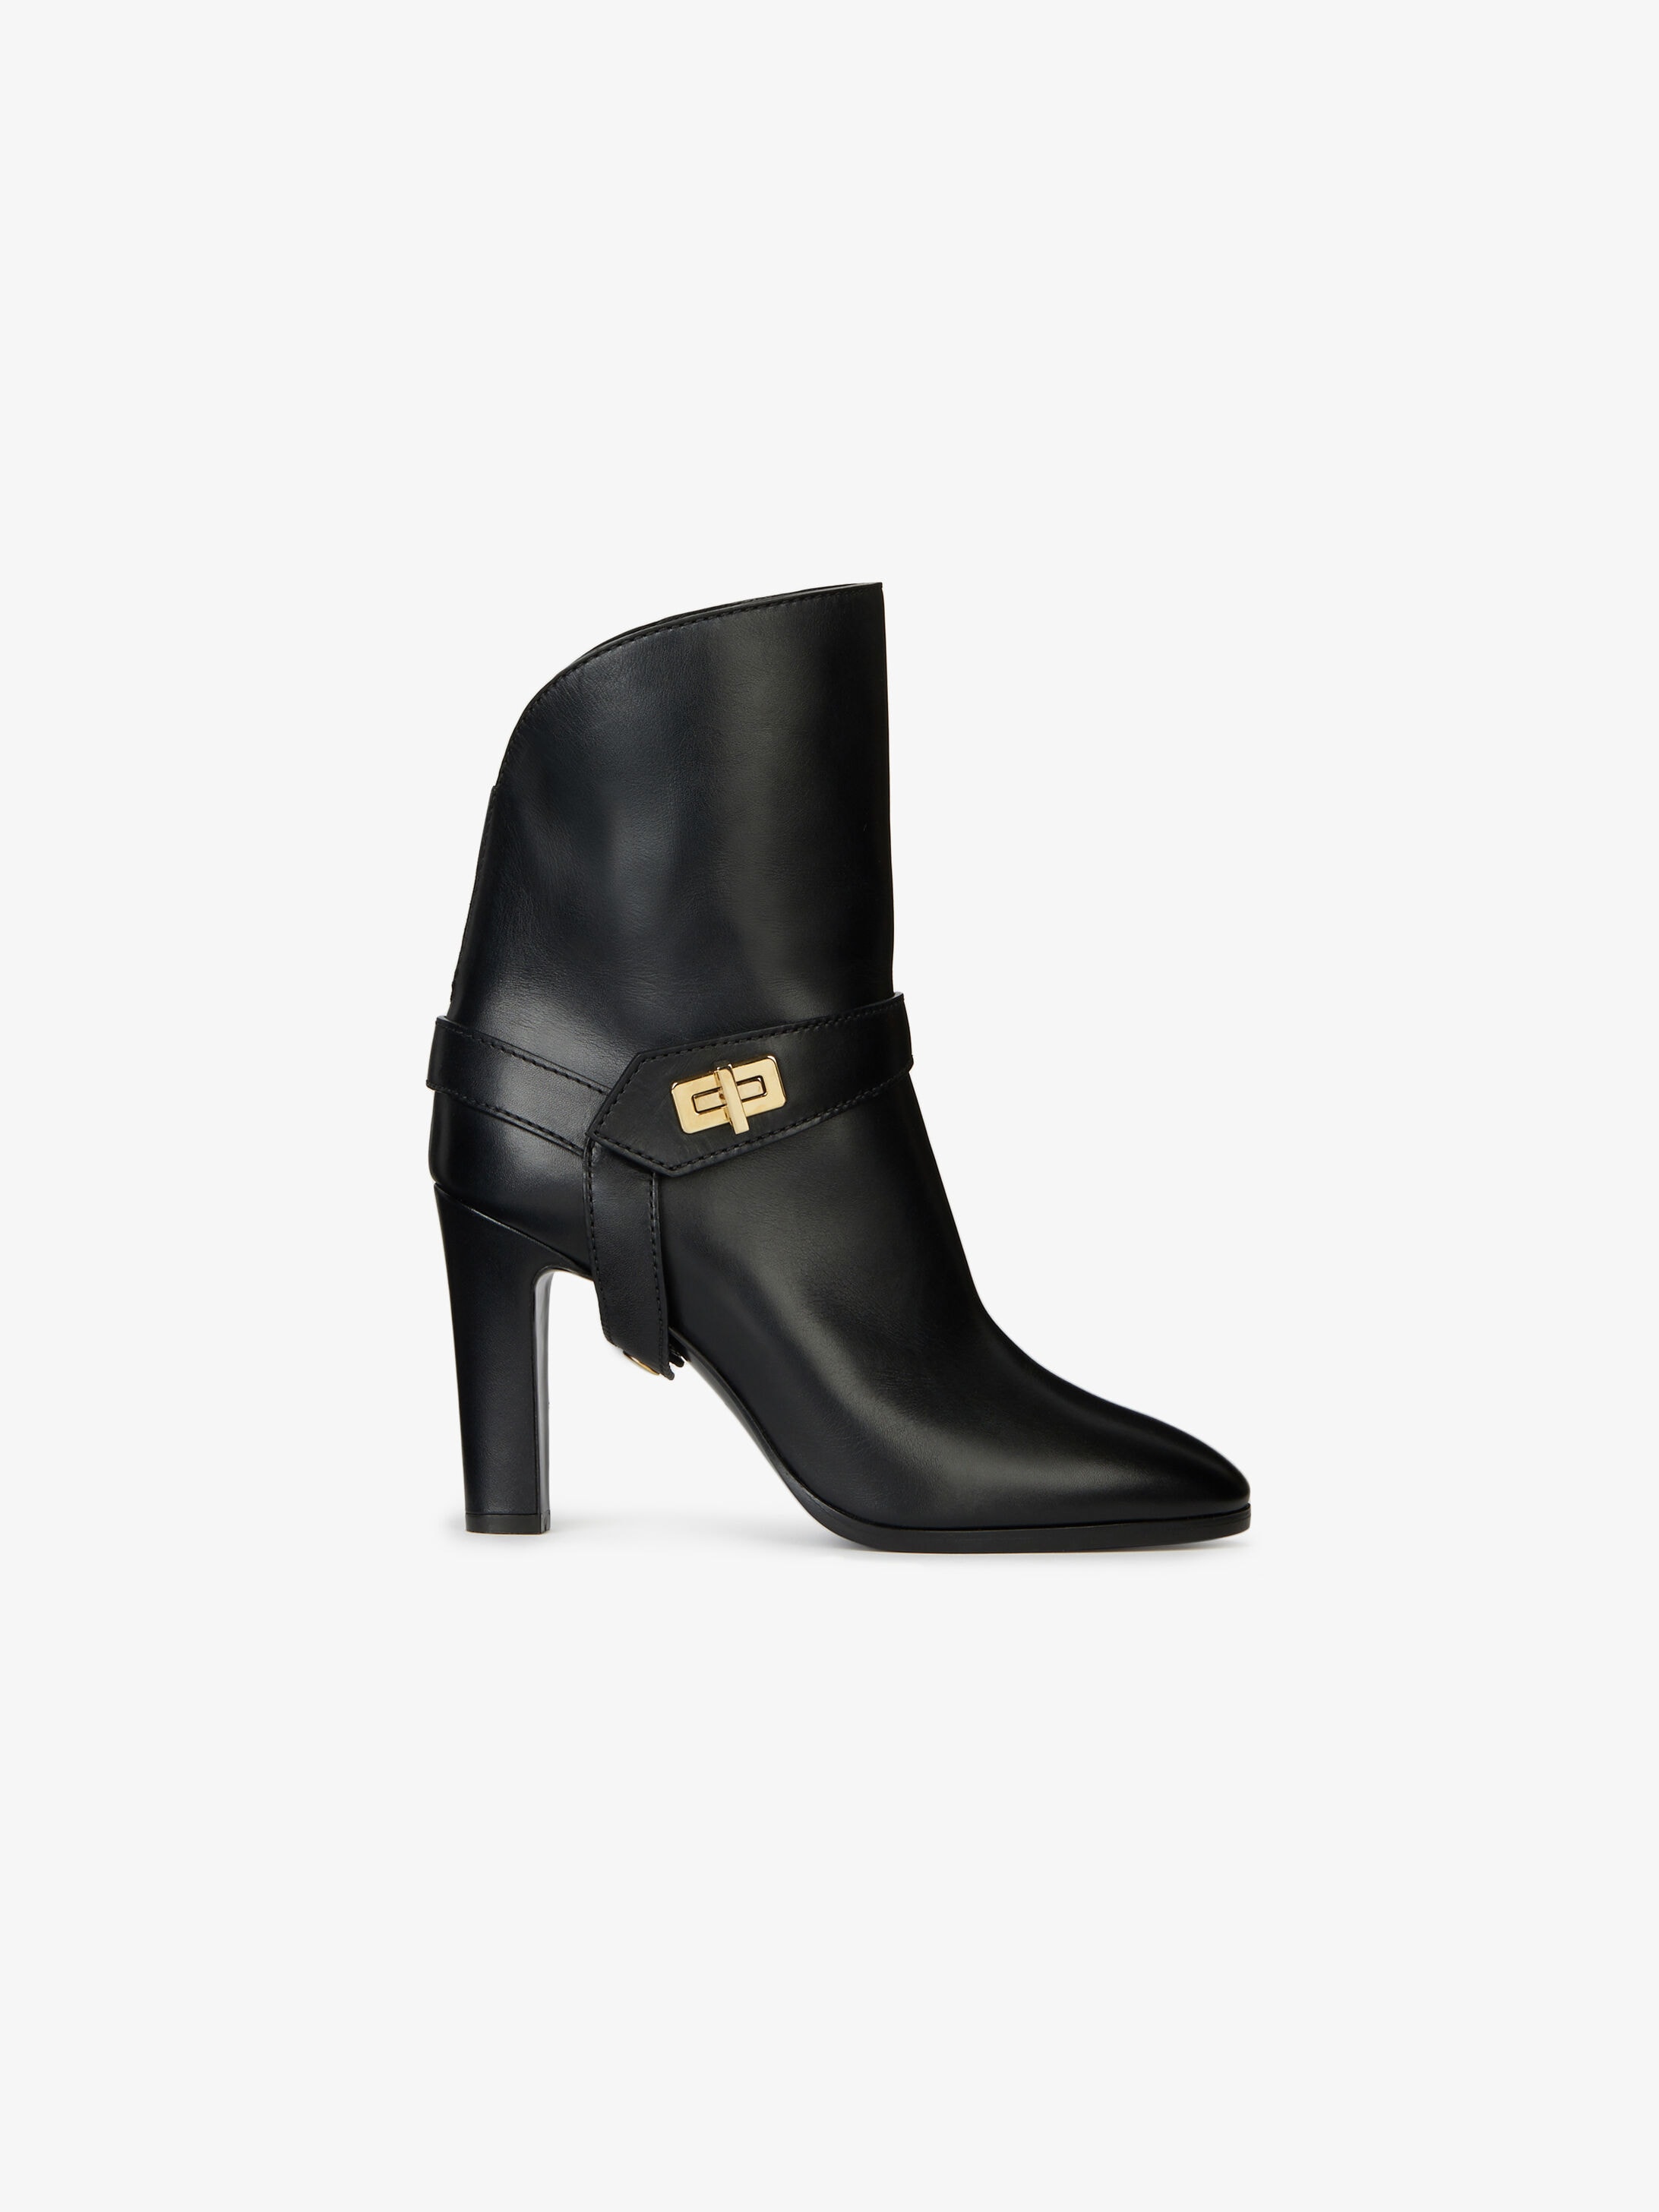 givenchy amarige 50ml boots